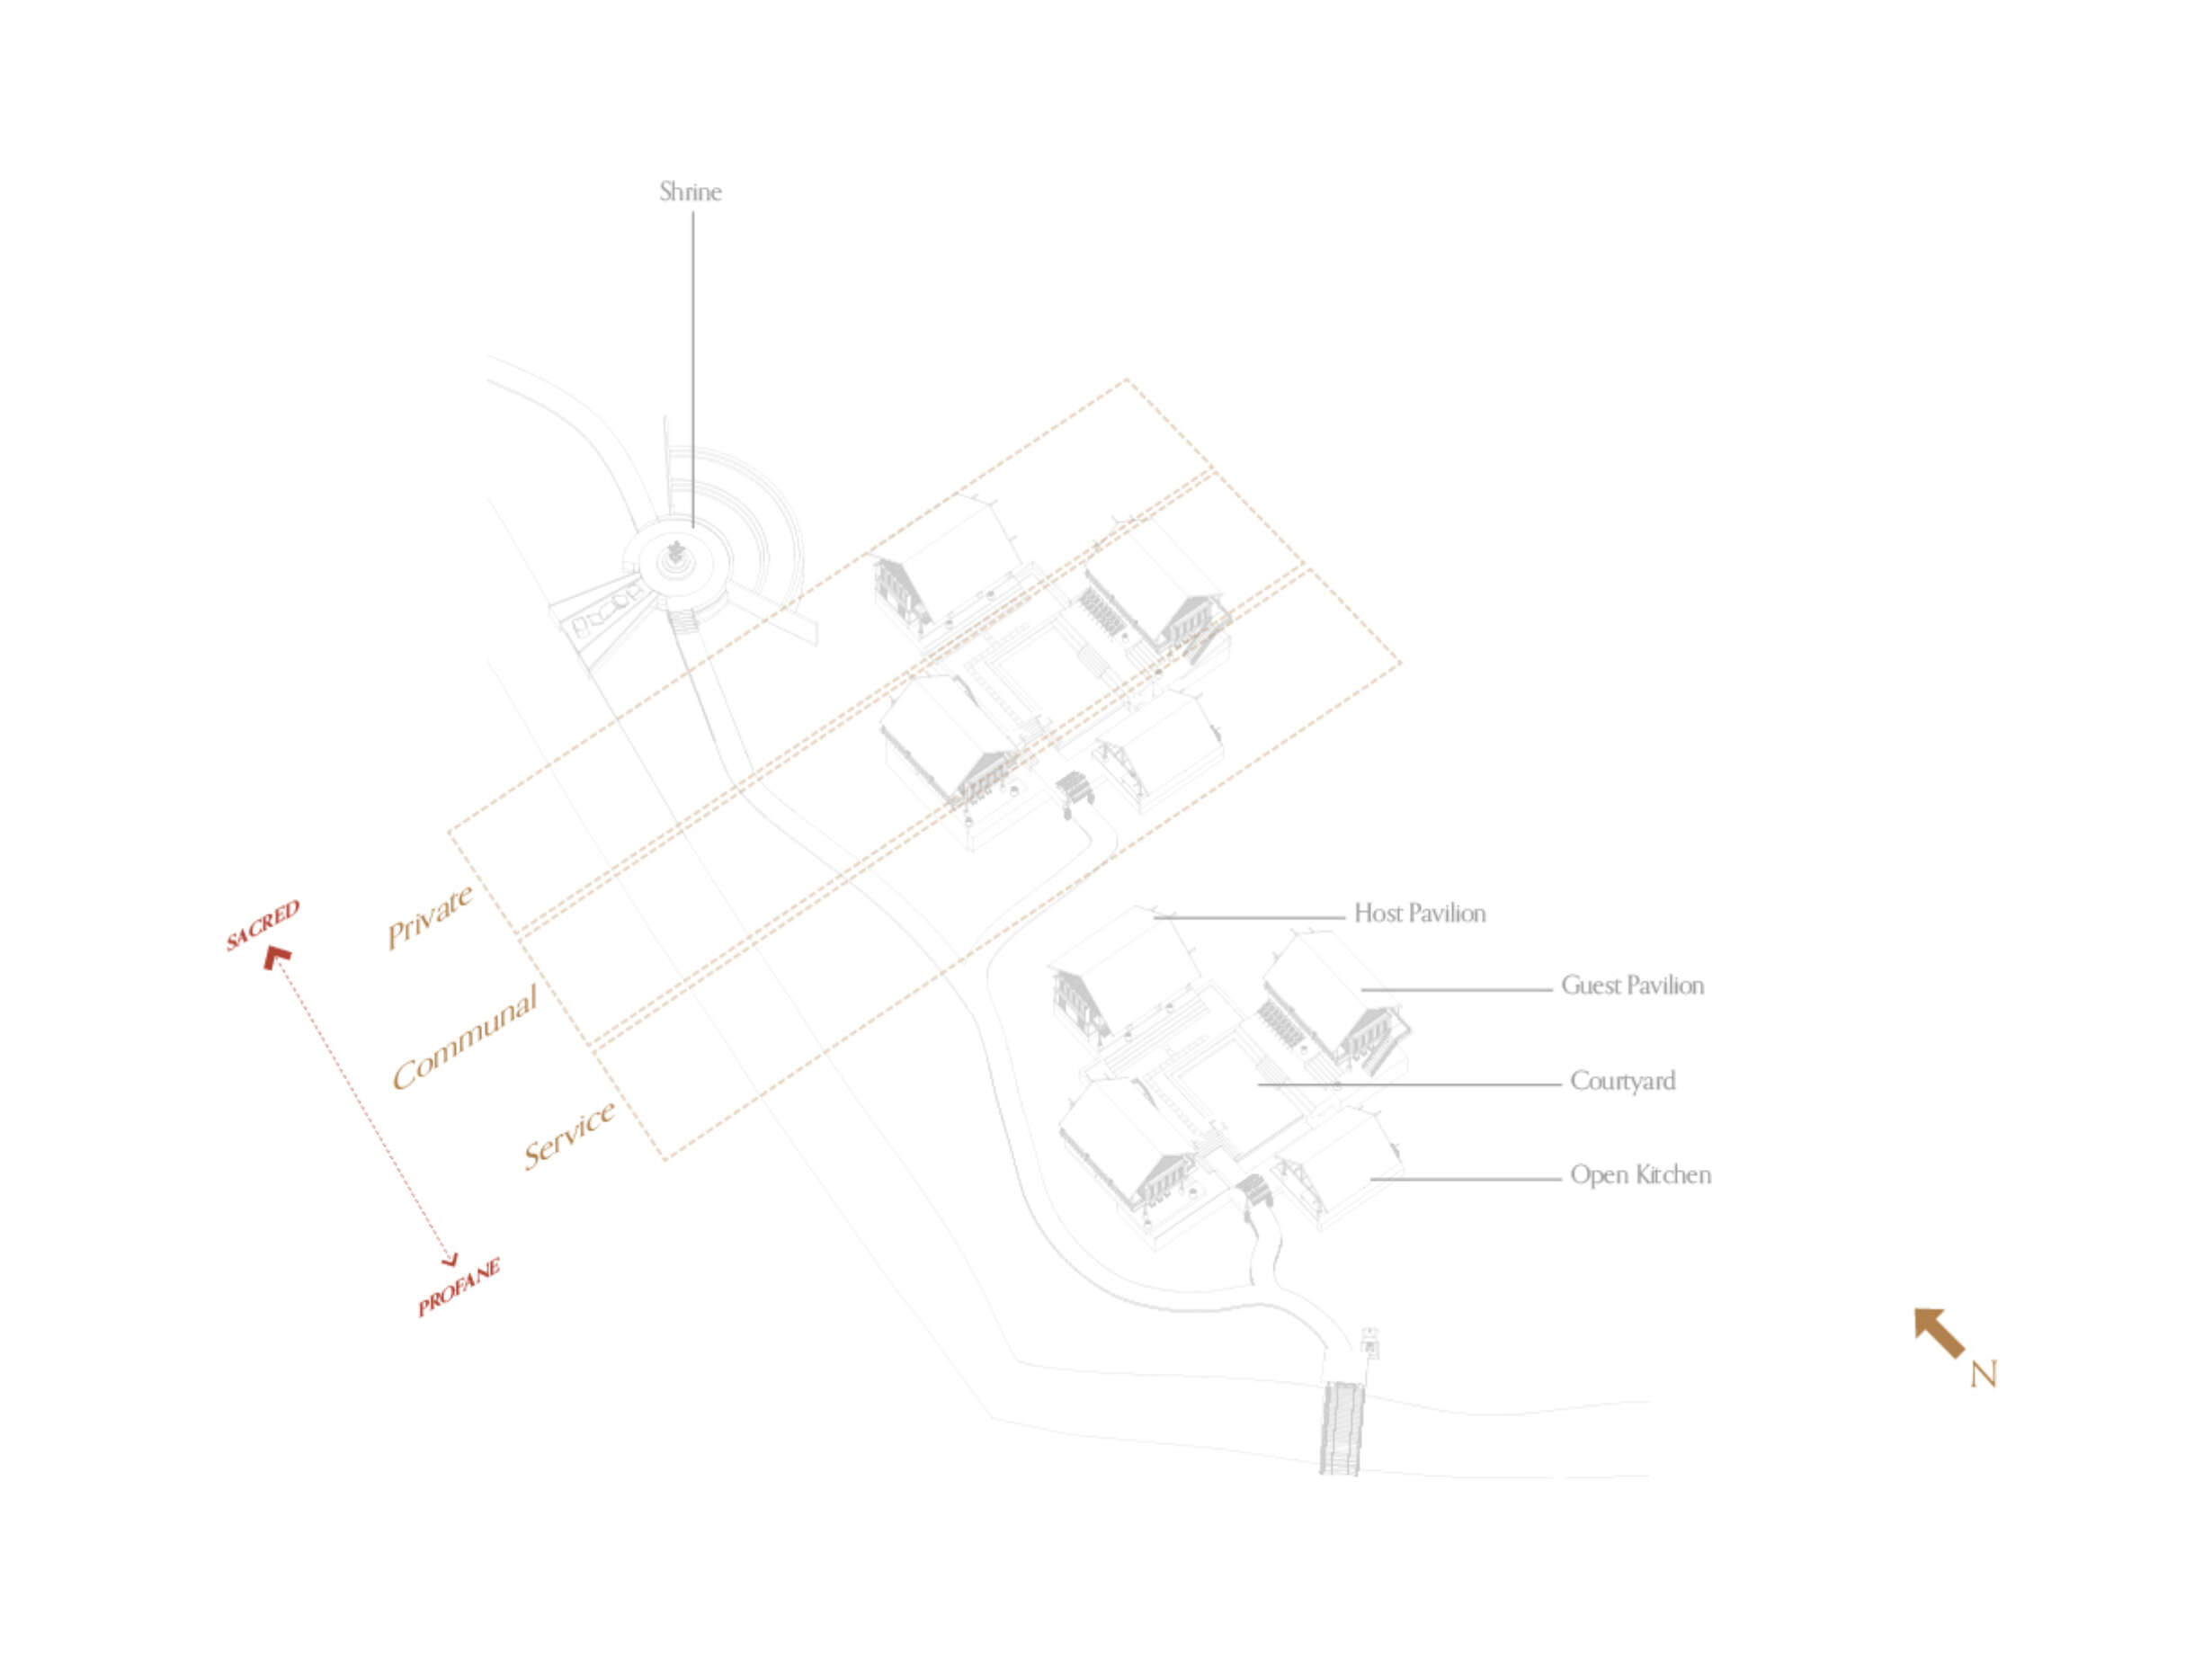 The second stop’s layout is based on the fundamental spatial orientation and composition for a traditional dwelling compound, divided into three areas (service, communal, and private zones) based on their degree of sacredness.